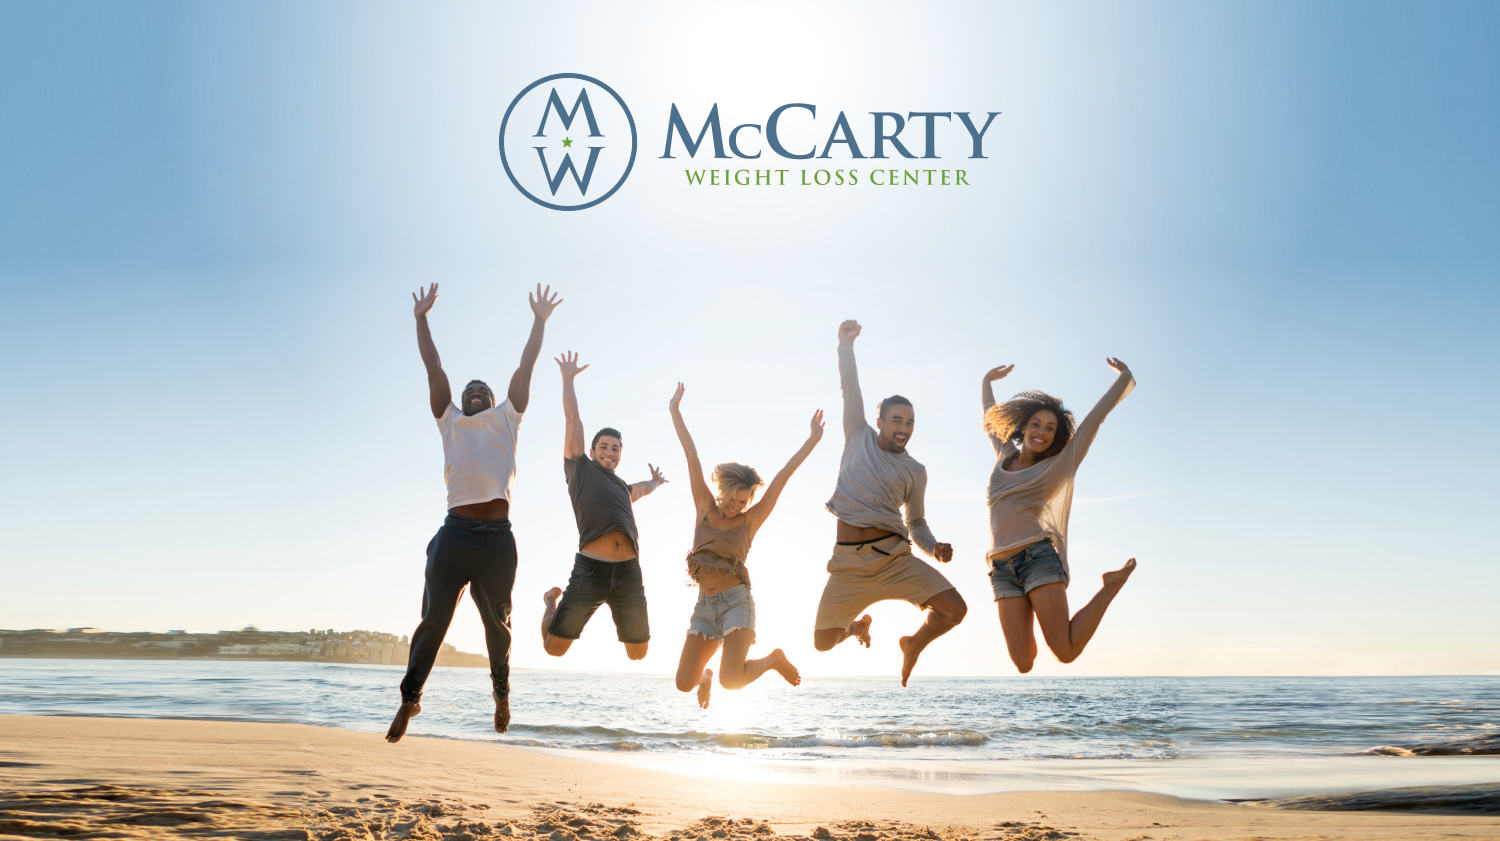 Bariatric Marketing - McCarty Weight Loss Center Dallas - Best Weight Loss Surgeon Dallas